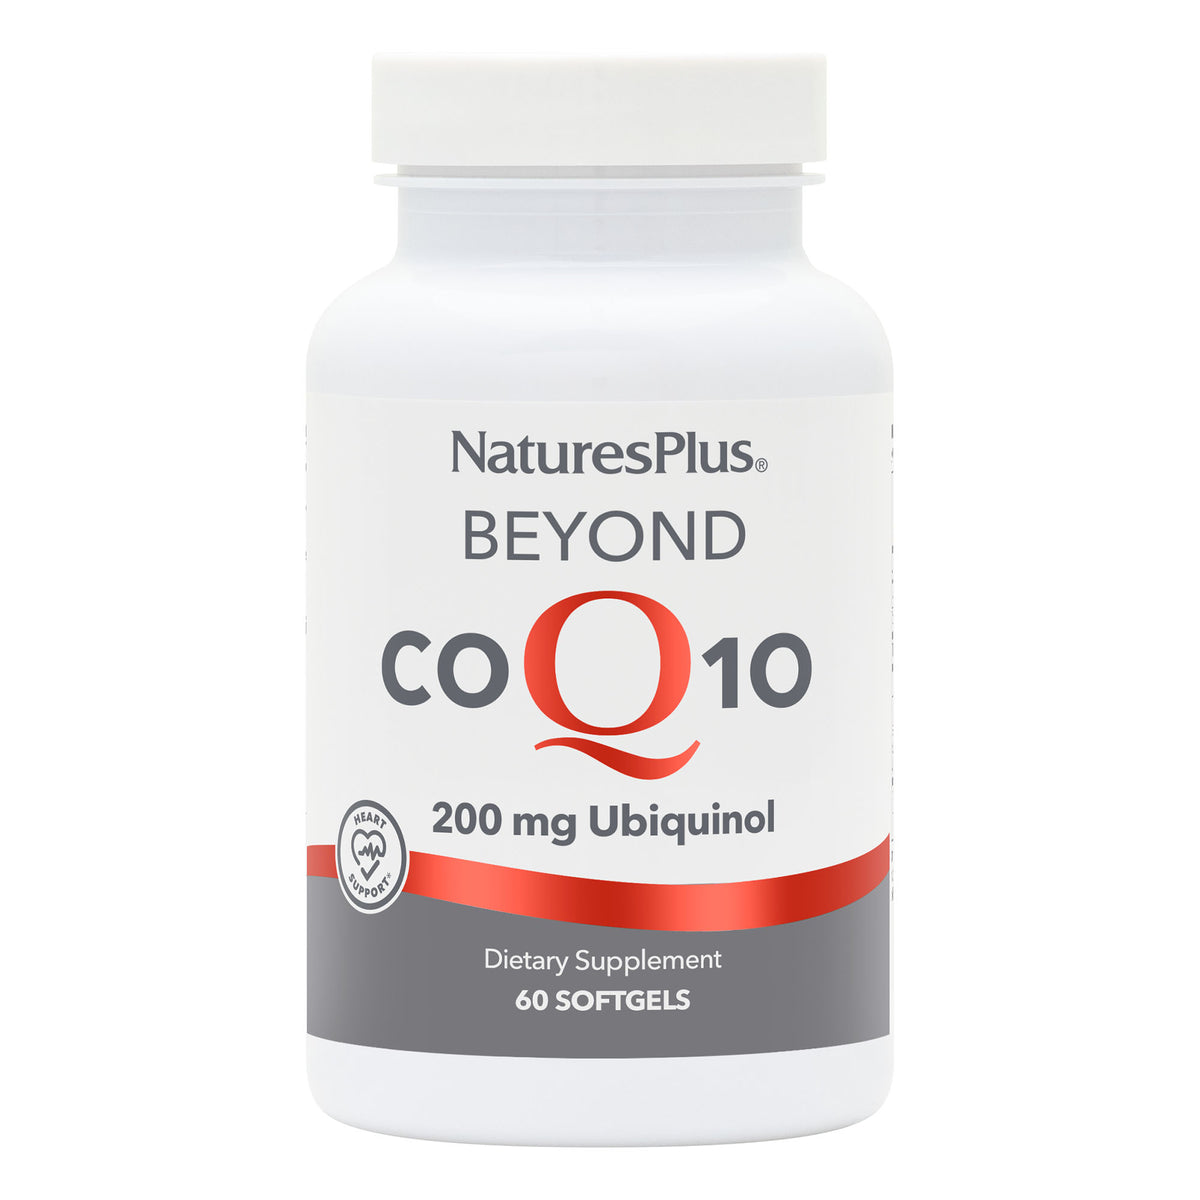 product image of Beyond CoQ10® 200 mg Softgels containing 60 Count